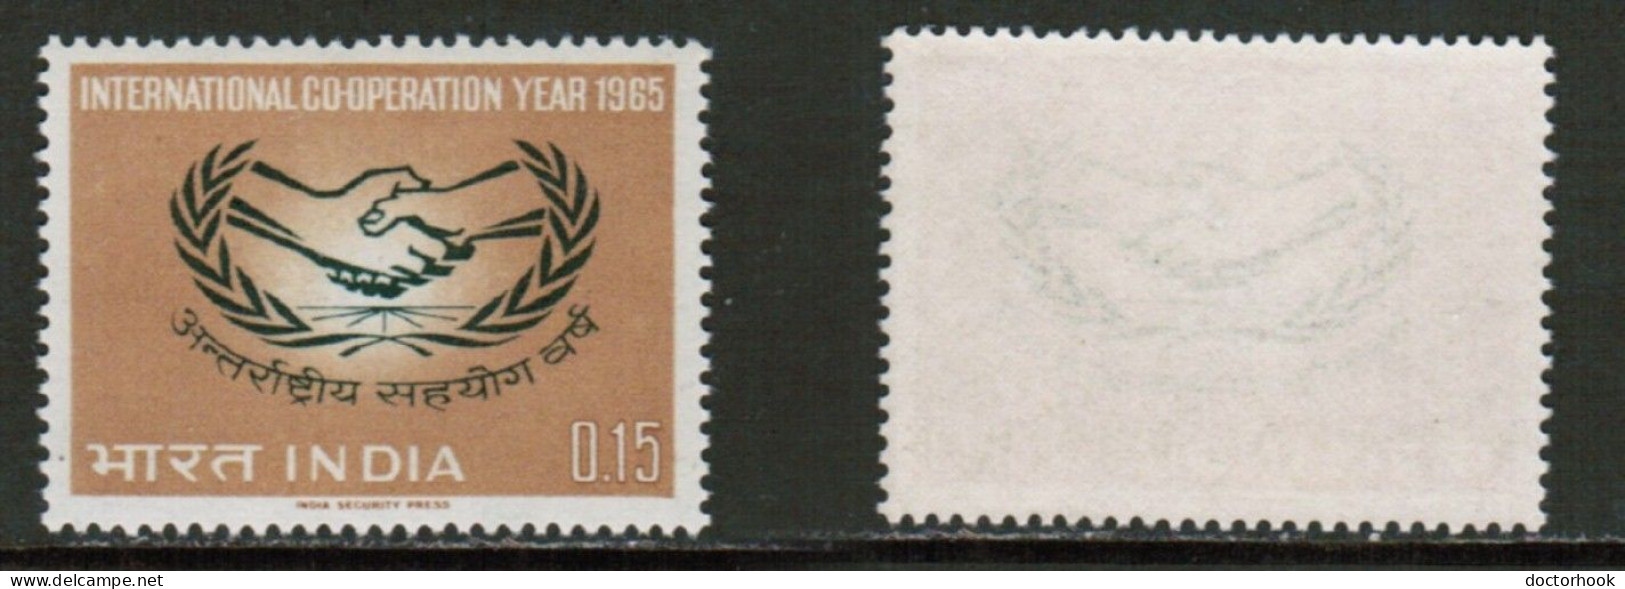 INDIA   Scott # 403** MINT NH (CONDITION AS PER SCAN) (Stamp Scan # 919-6) - Nuovi